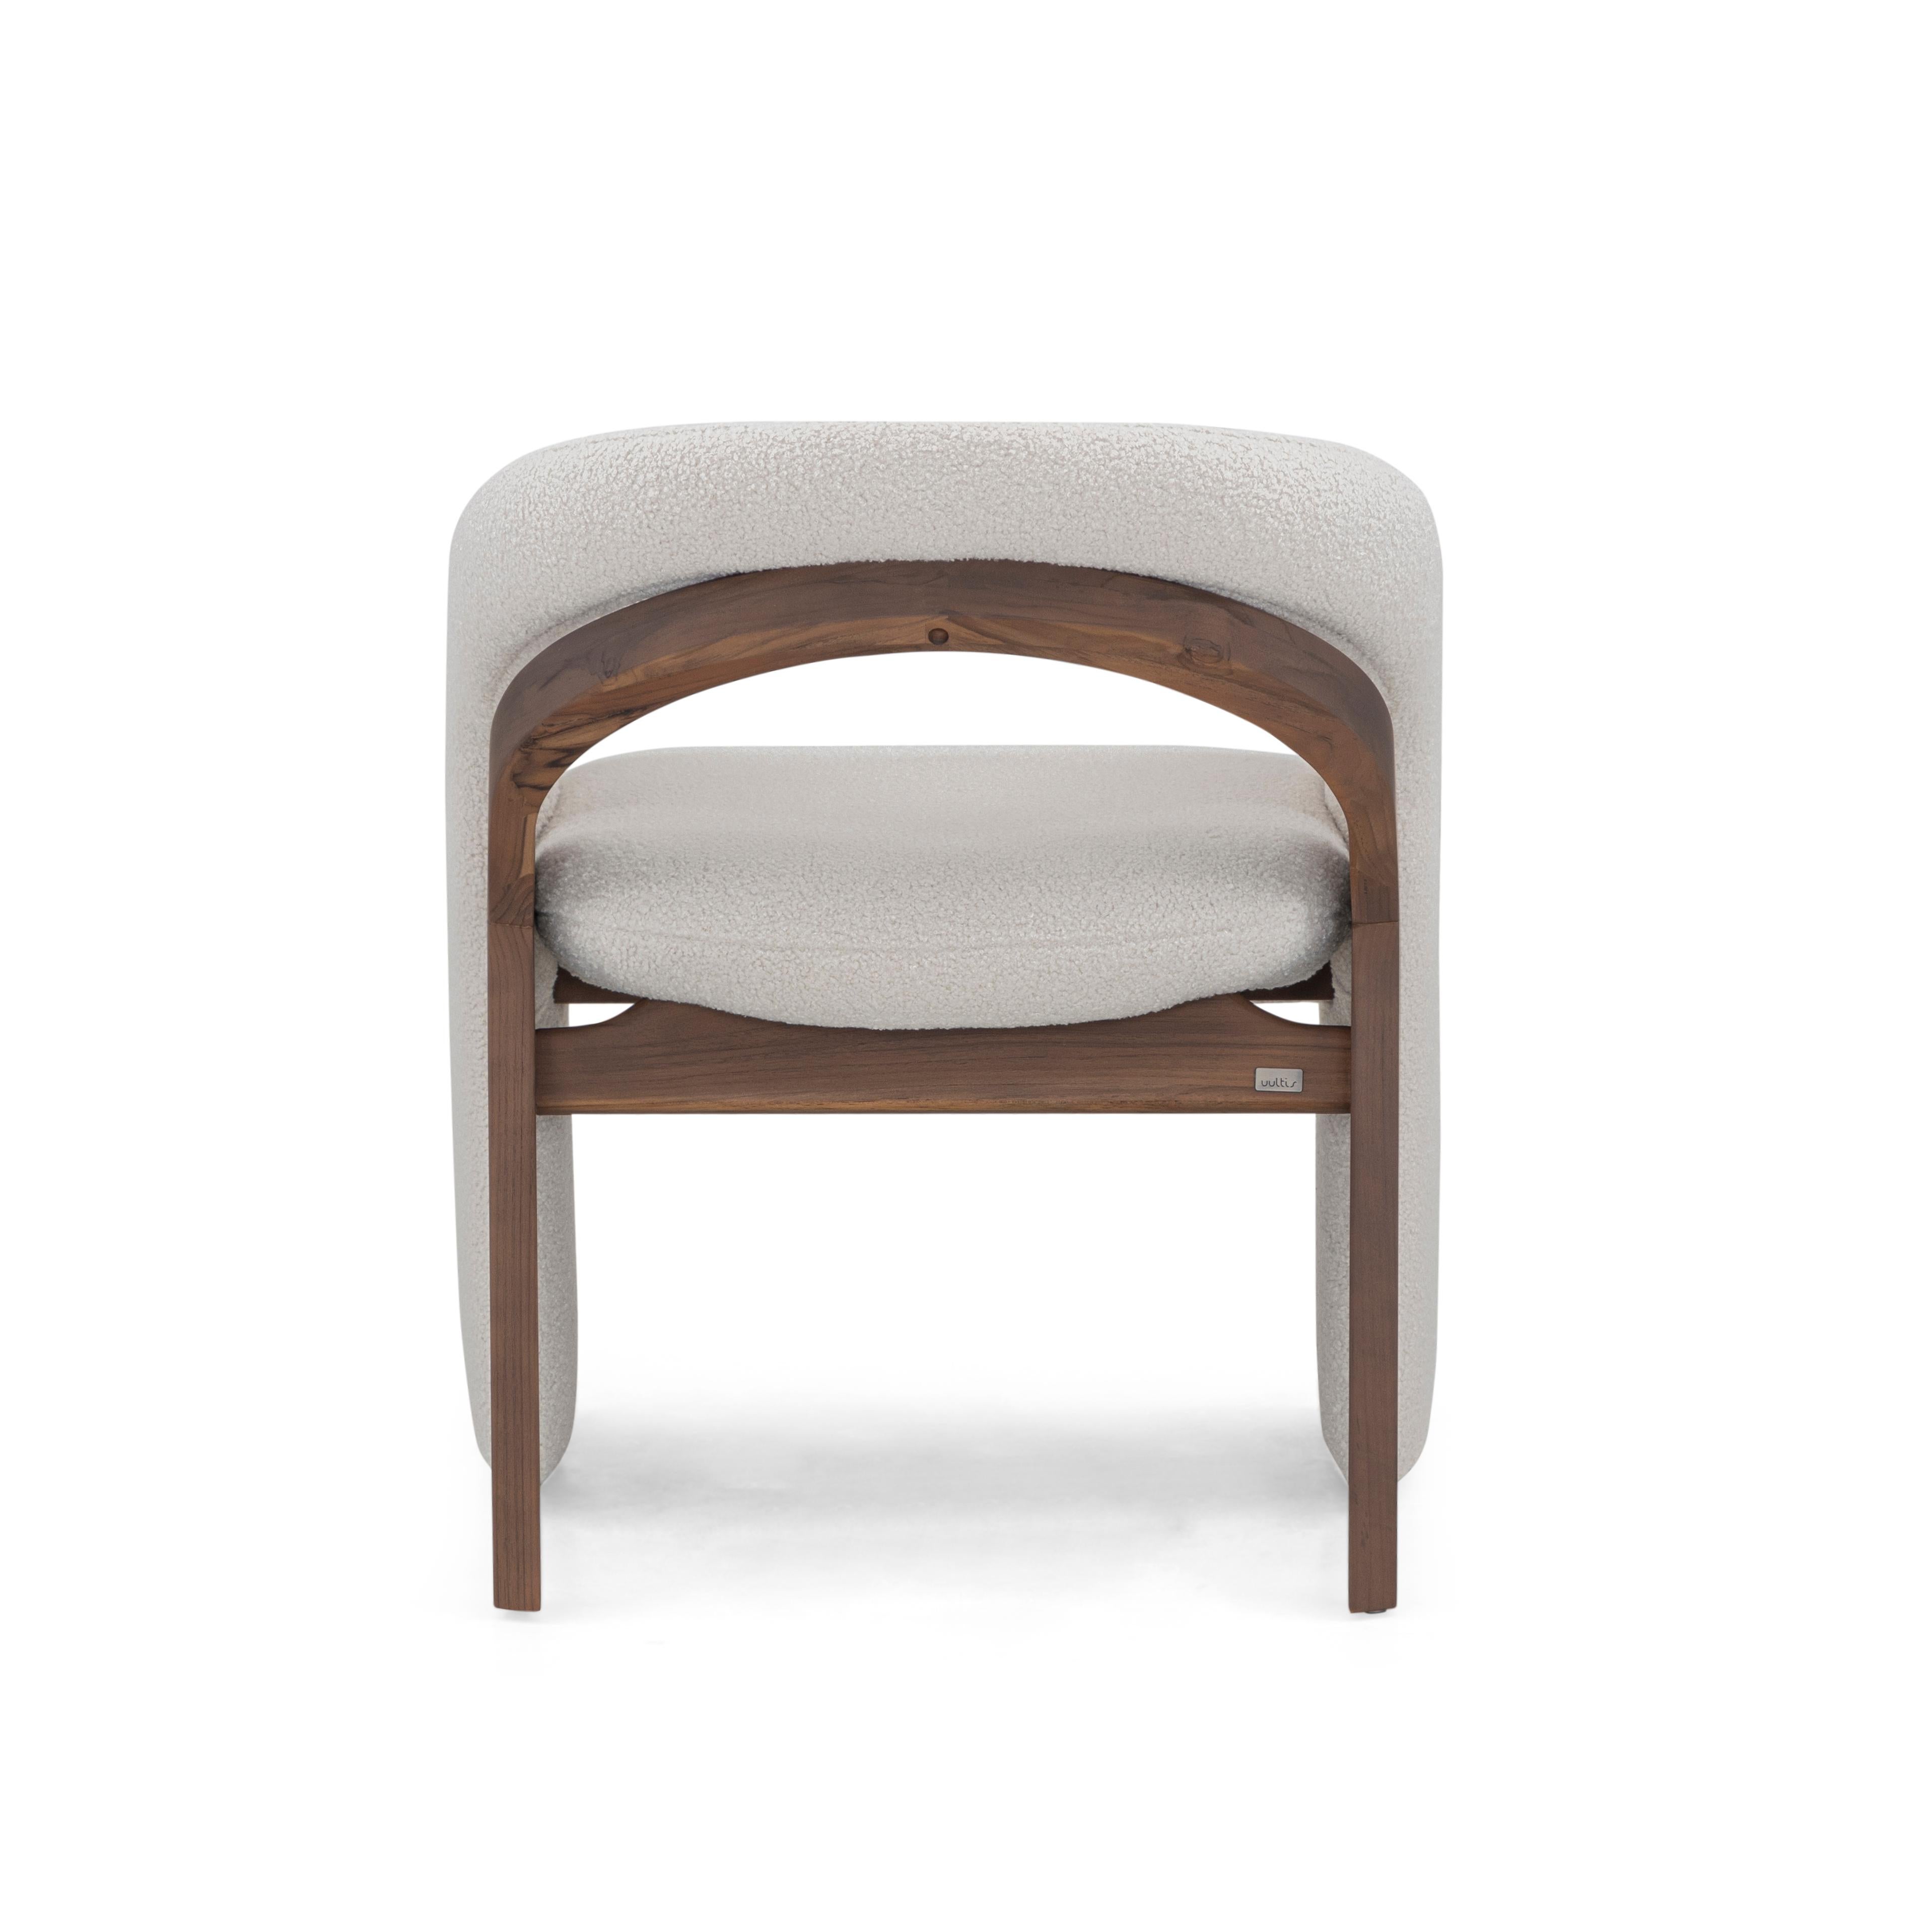 Olga Contemporary Dining Chair in Walnut Wood Finish and White Boucle Fabric In New Condition For Sale In Miami, FL